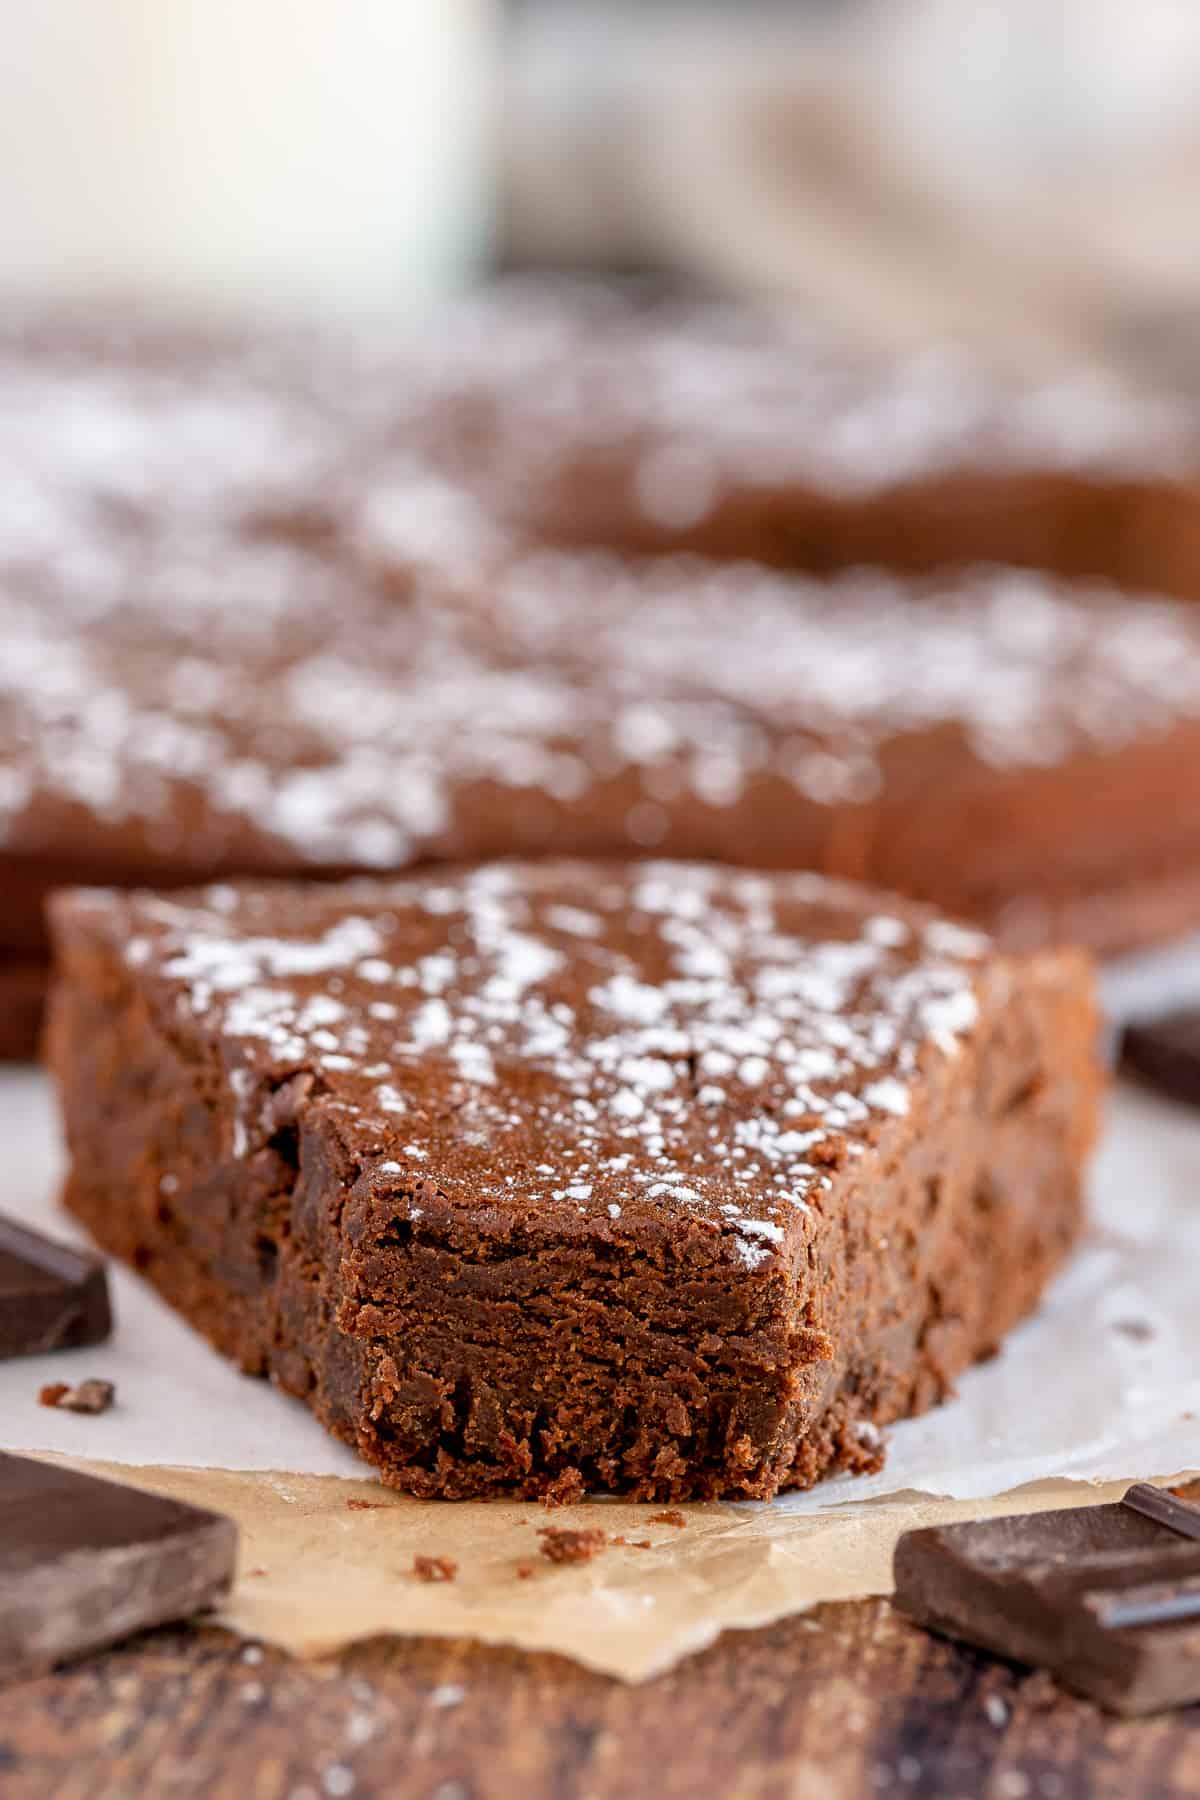 A slice of French Chocolate Cake with a bite missing.